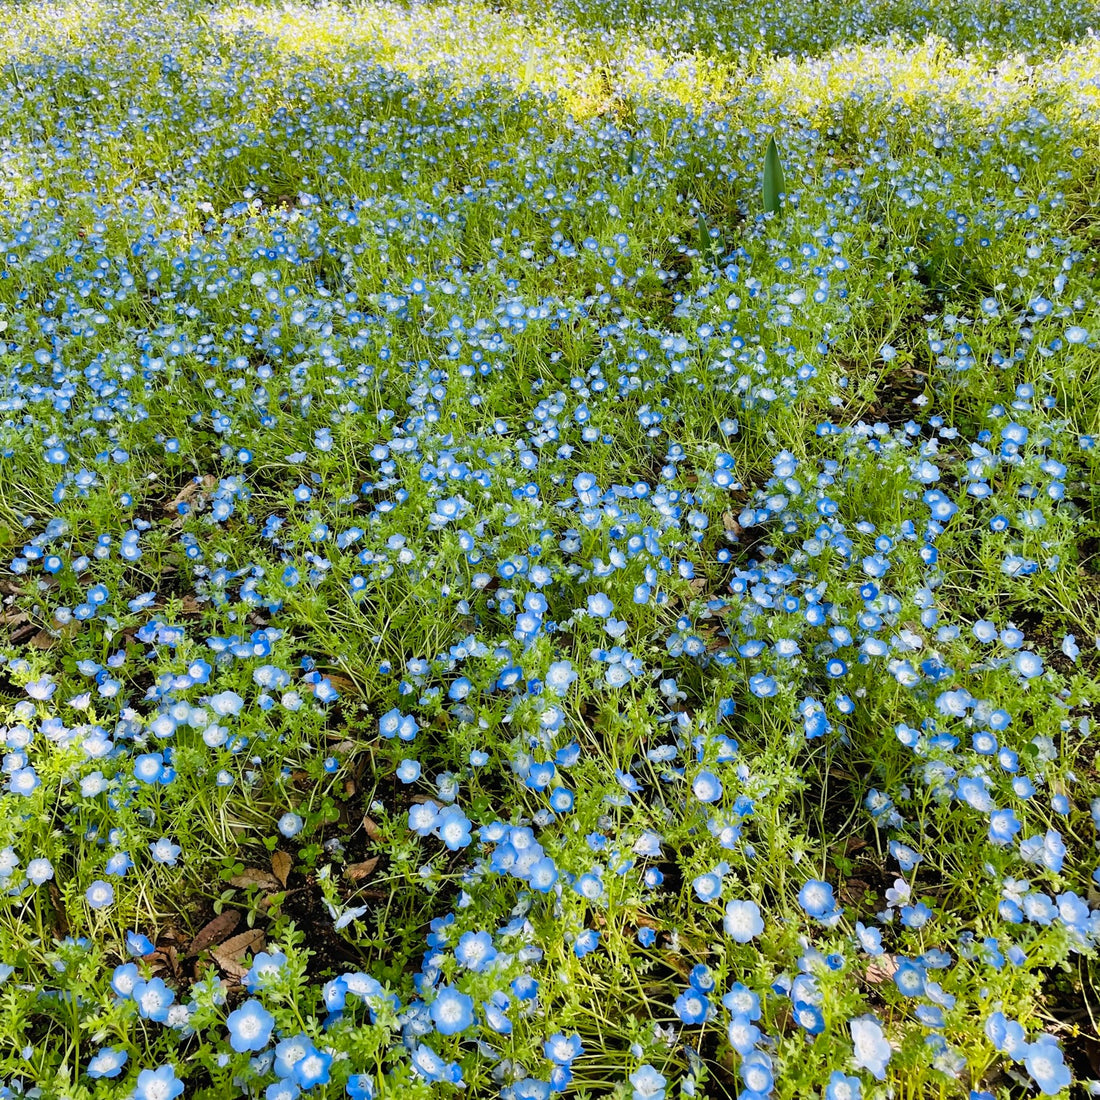 Nemophila, tulips, and dogwood are currently in full bloom in Hibiya Park